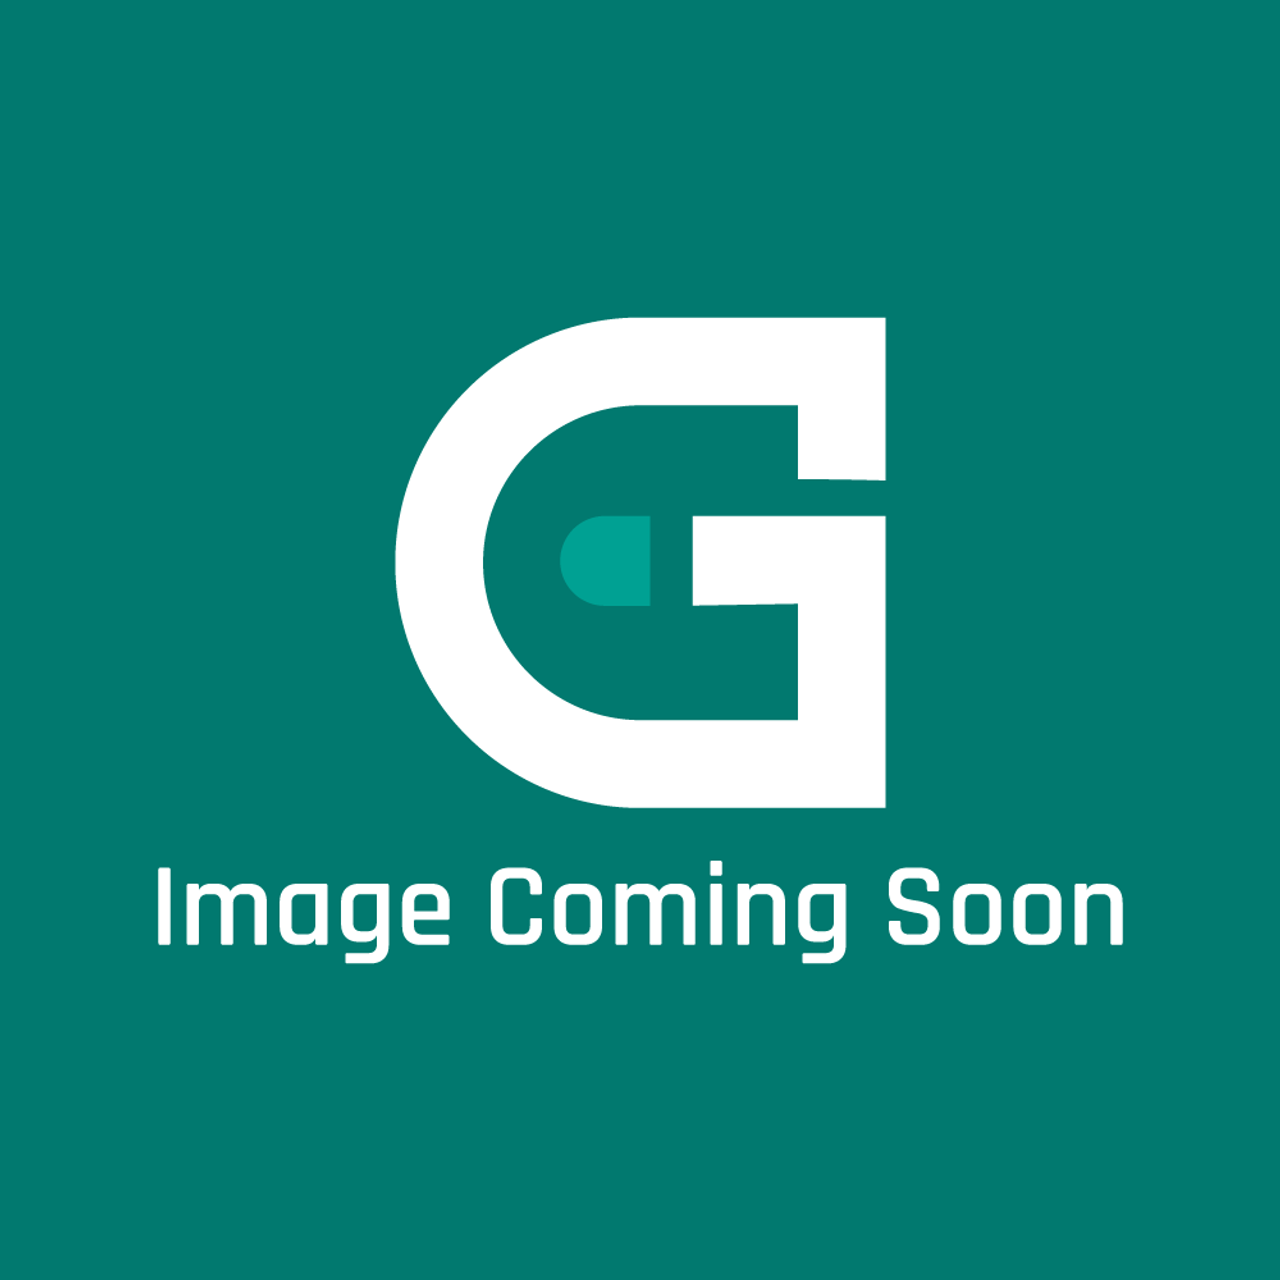 Frigidaire - Electrolux 5304499333 Grate - Image Coming Soon!